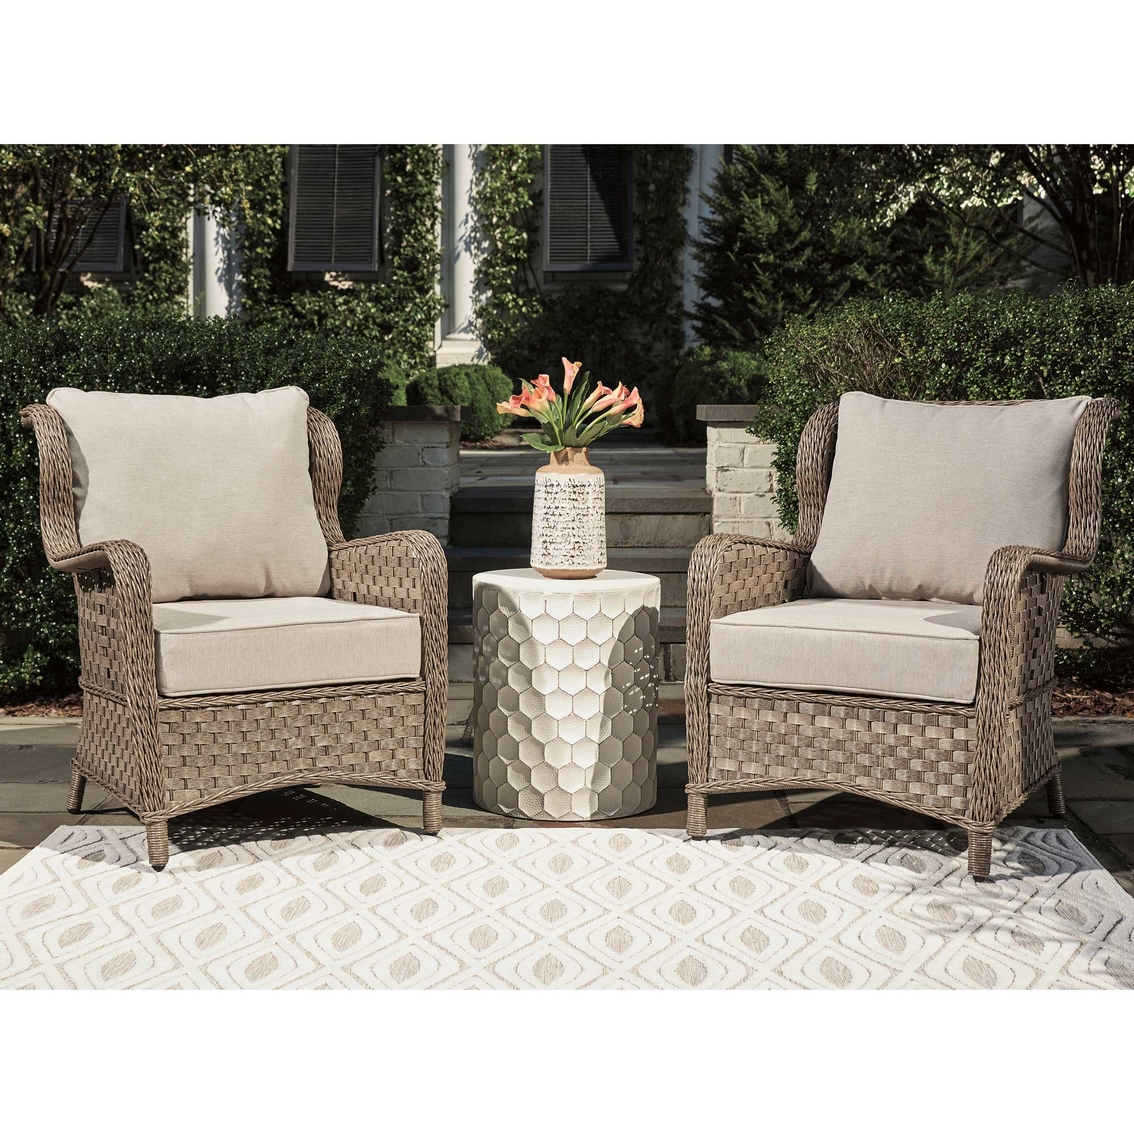 Signature Design By Ashley Clear Ridge Outdoor Lounge Chair 2 Pk Tables Chairs Patio Garden Garage Shop The Exchange